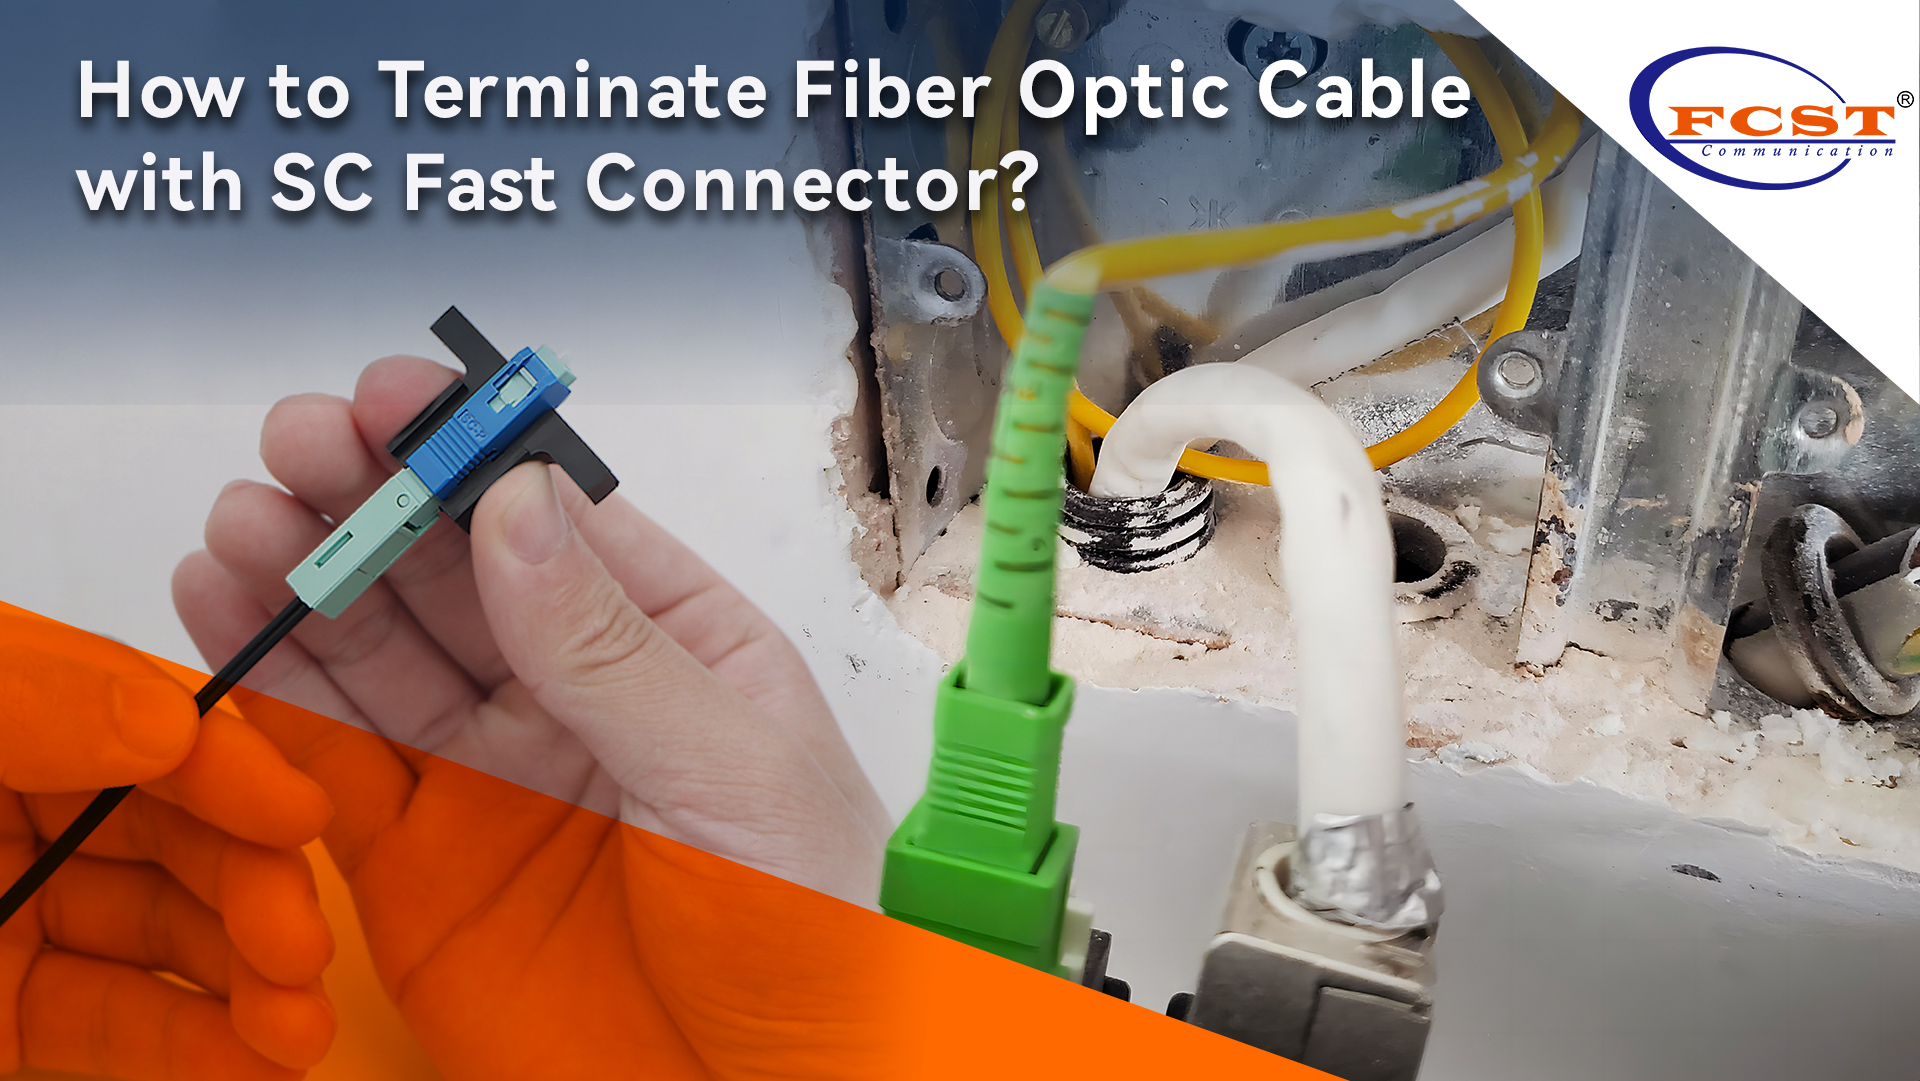 How to Terminate Fiber Optic Cable with SC Fast Connector?